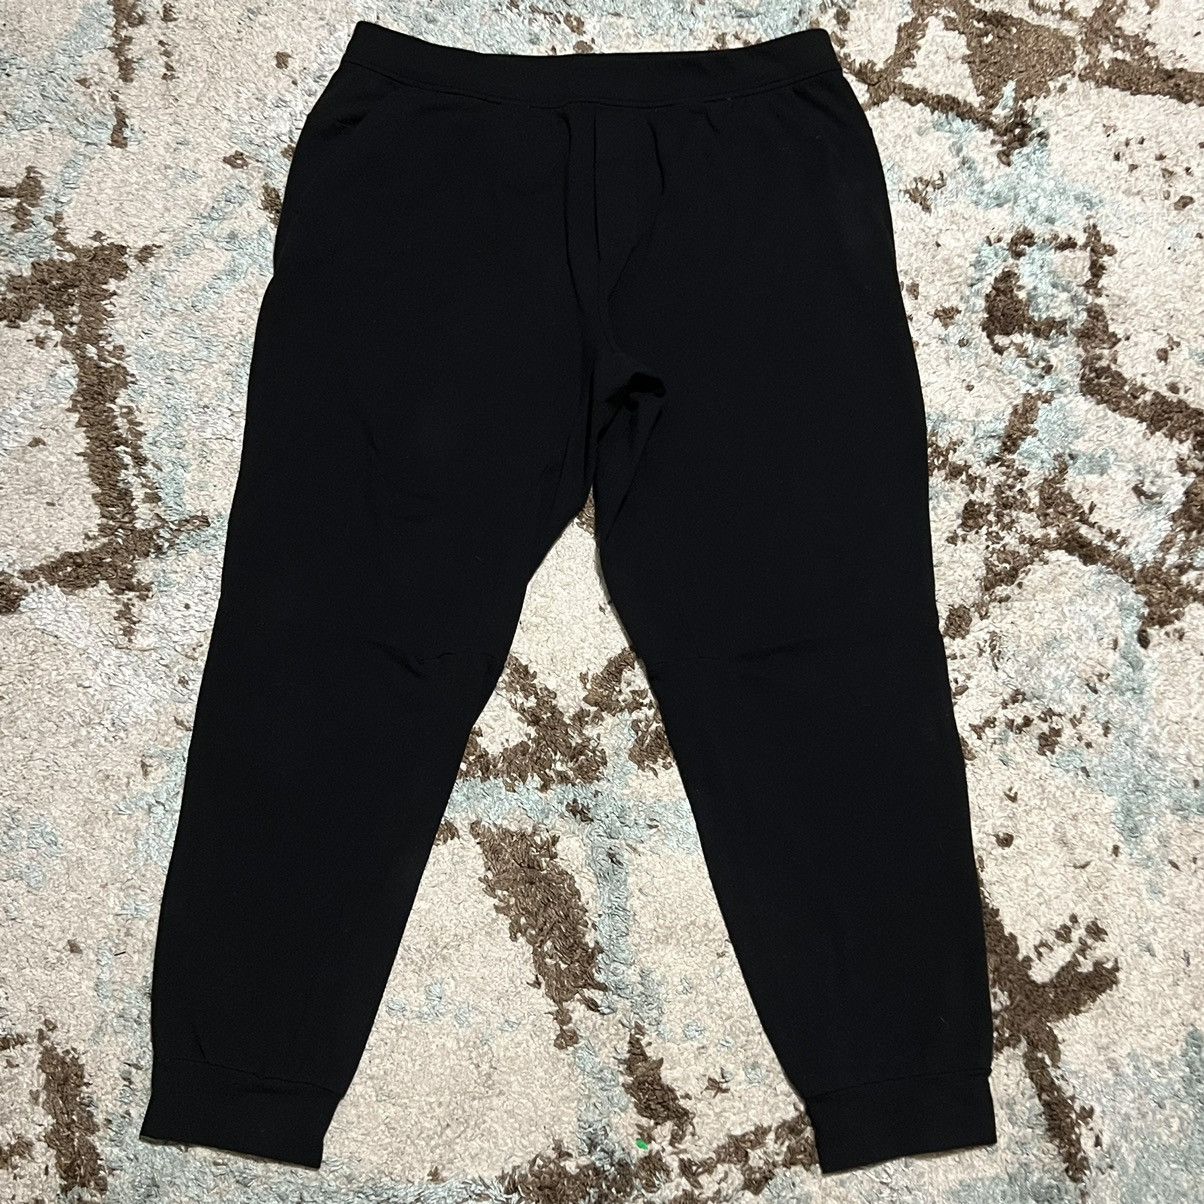 New Lululemon Intent Jogger in Black - NWT